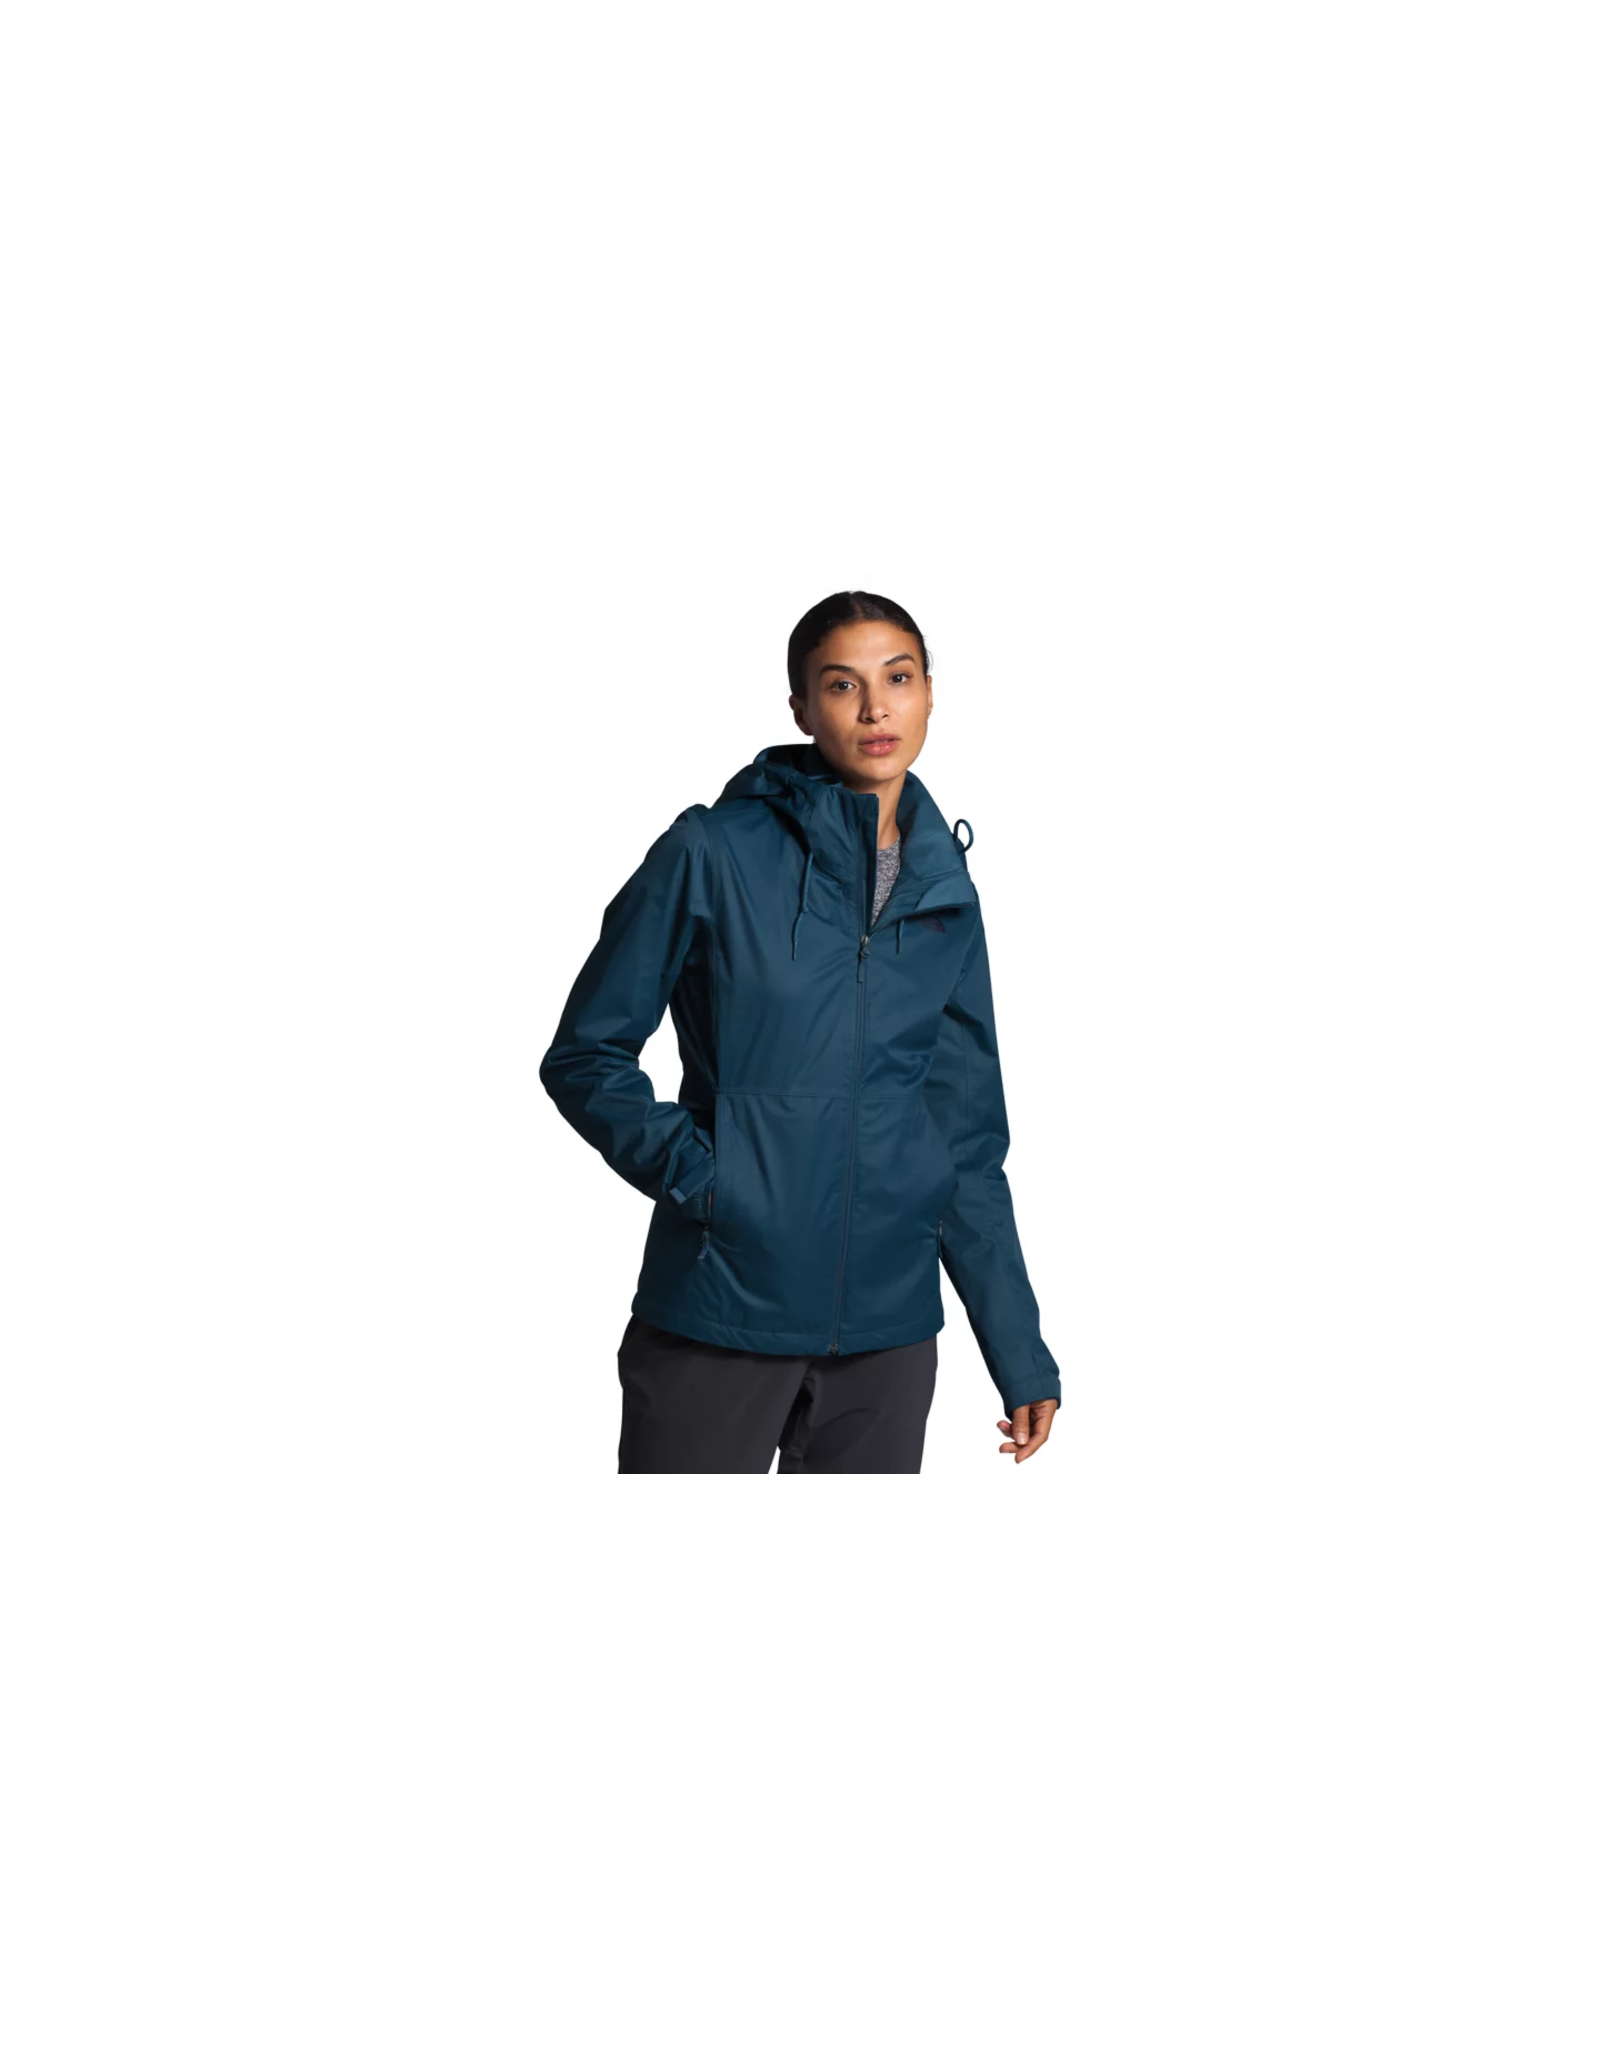 north face arrowood triclimate womens review